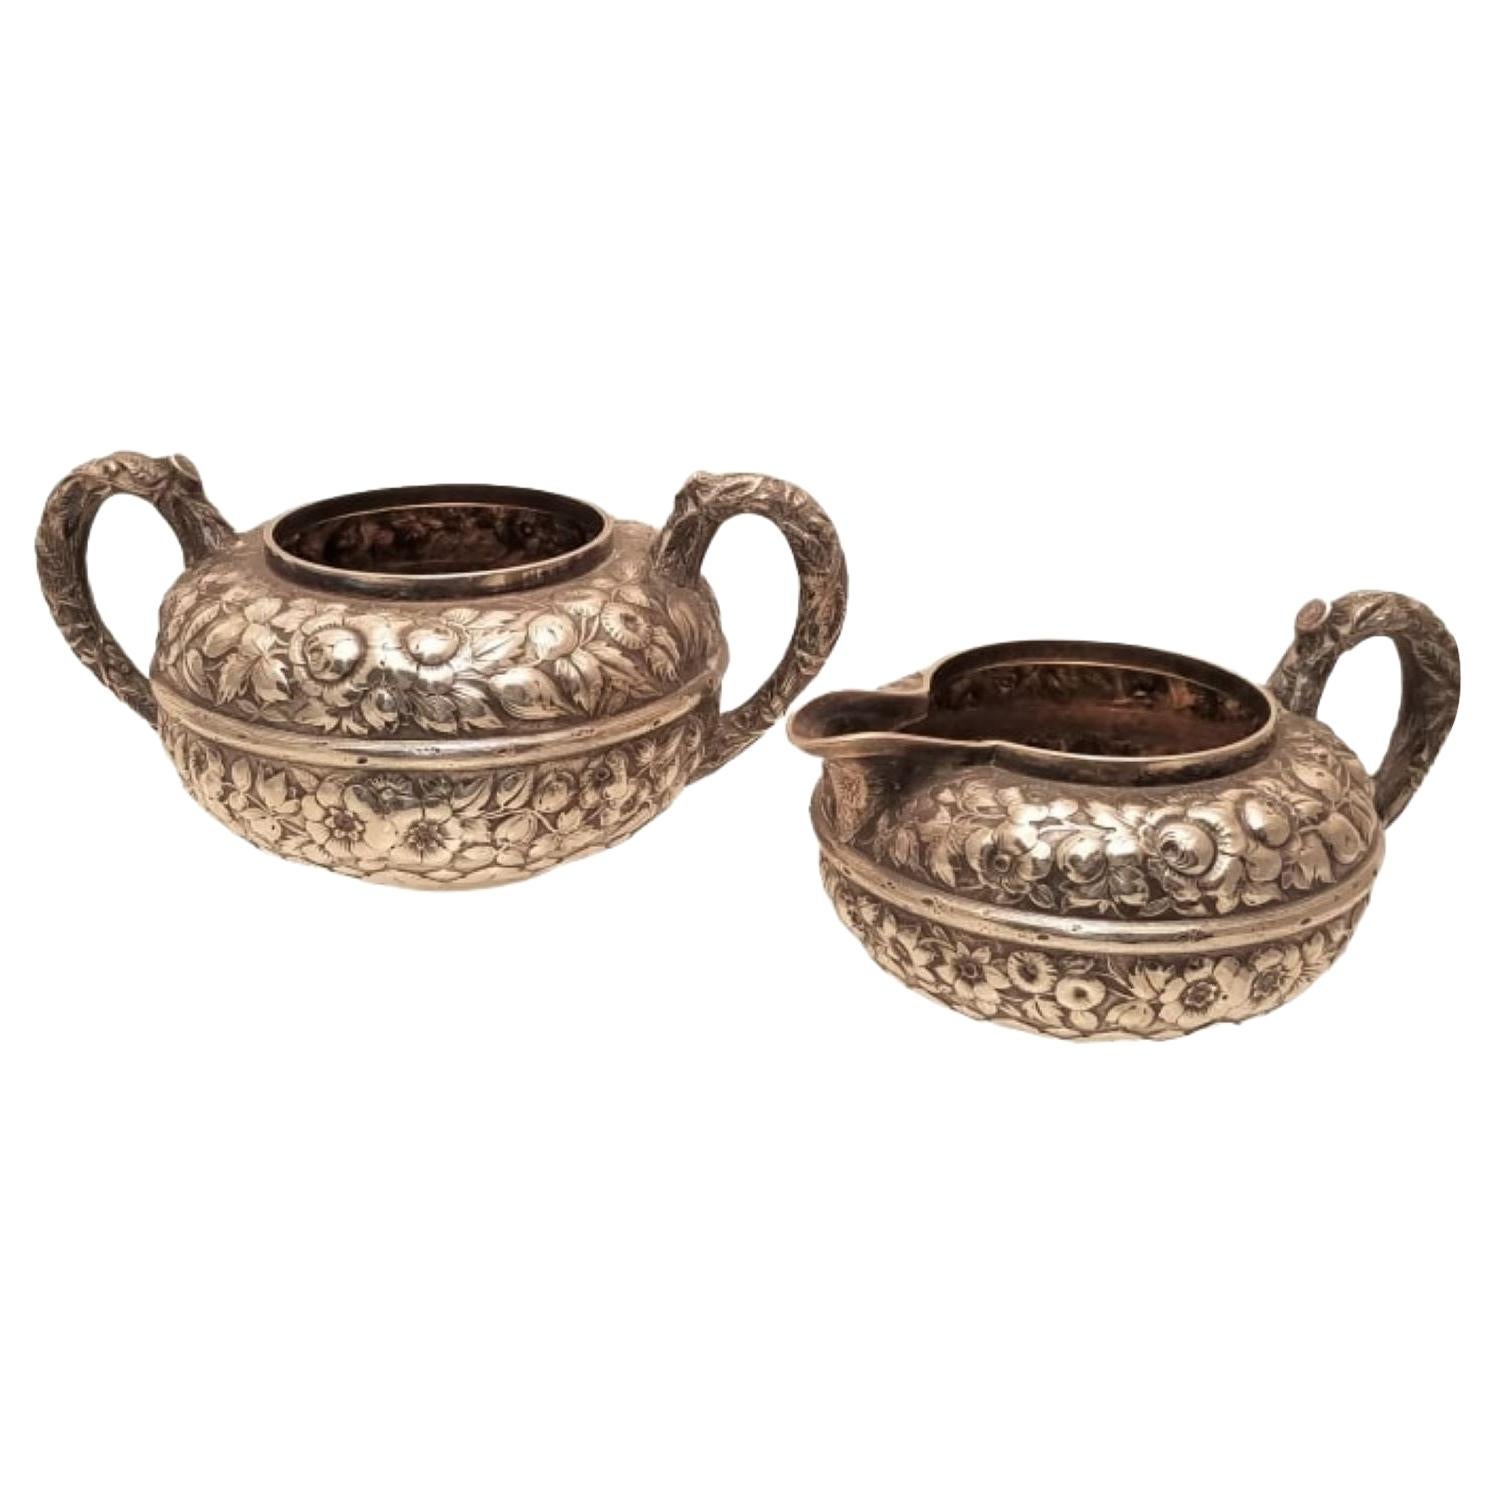 Gorham Sterling Silver Creamer and Sugar Set in Repousse Design from 1880